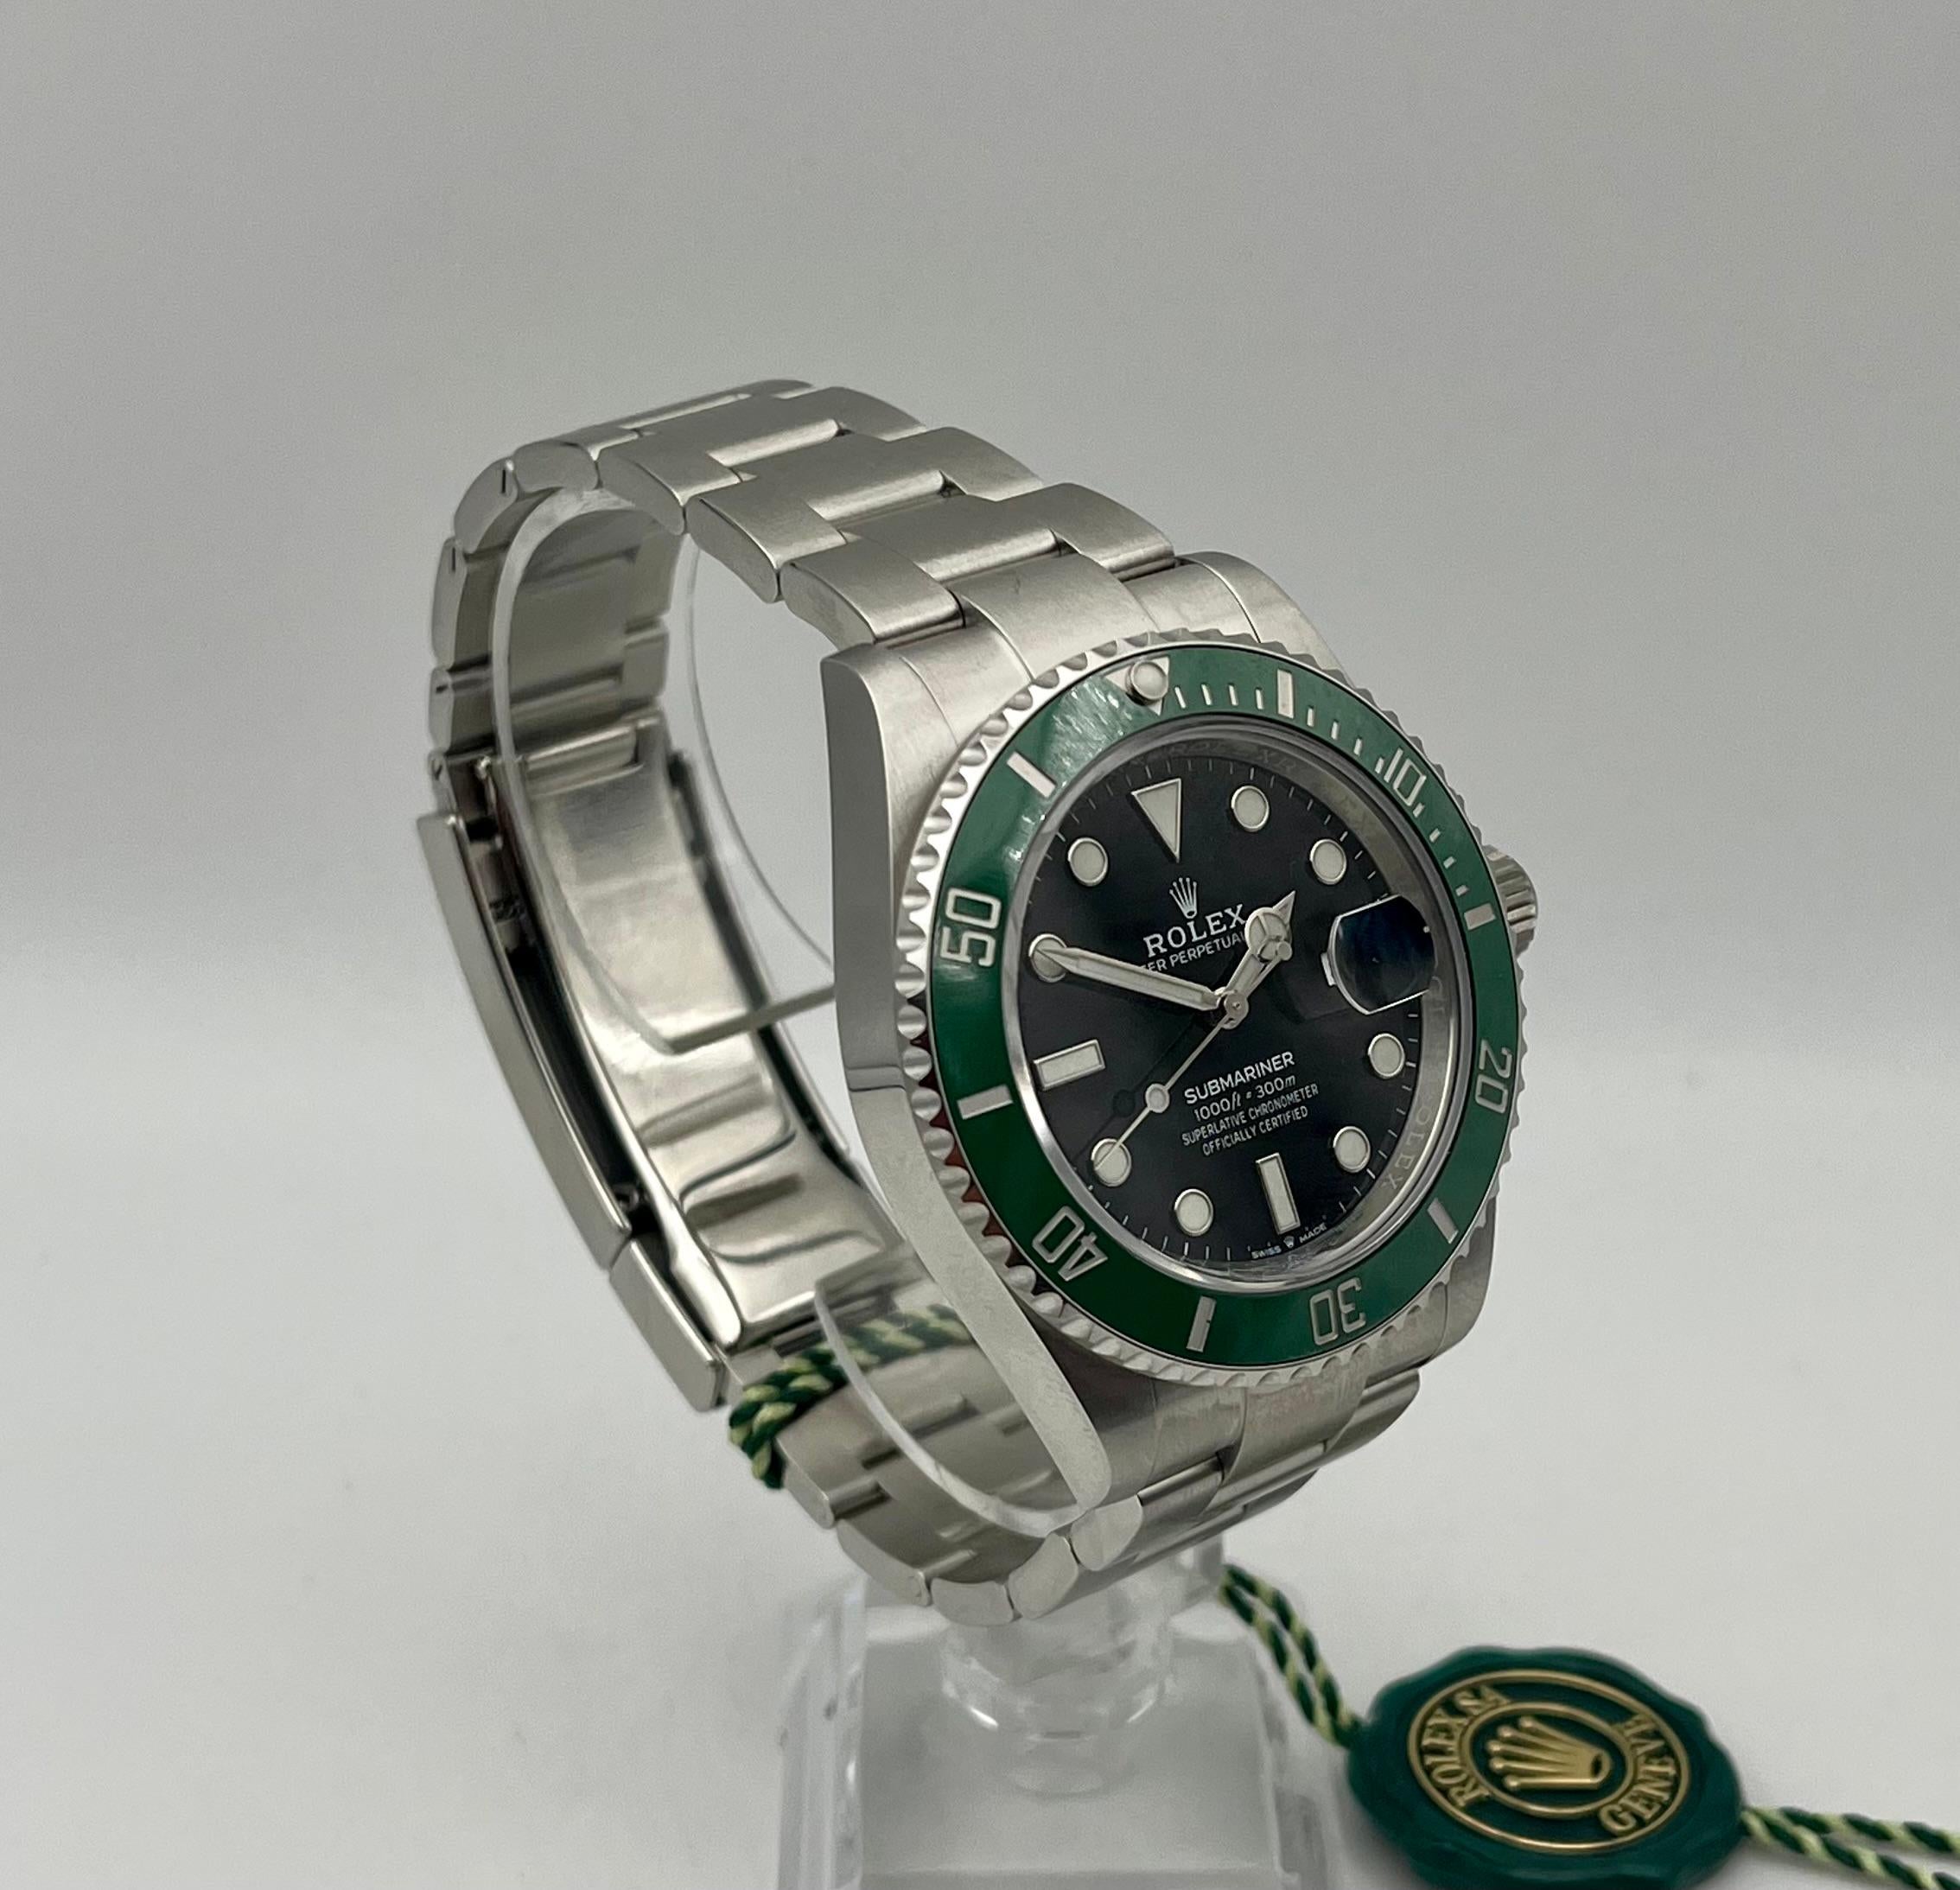 New Oyster Perpetual Rolex Submariner Kermit this piece comes with a Rolex box, papers , two year warranty and guaranteed authenticity. Rf. Number 126610LV

Just over a decade after the introduction of the Submariner diving watch, Rolex launched the